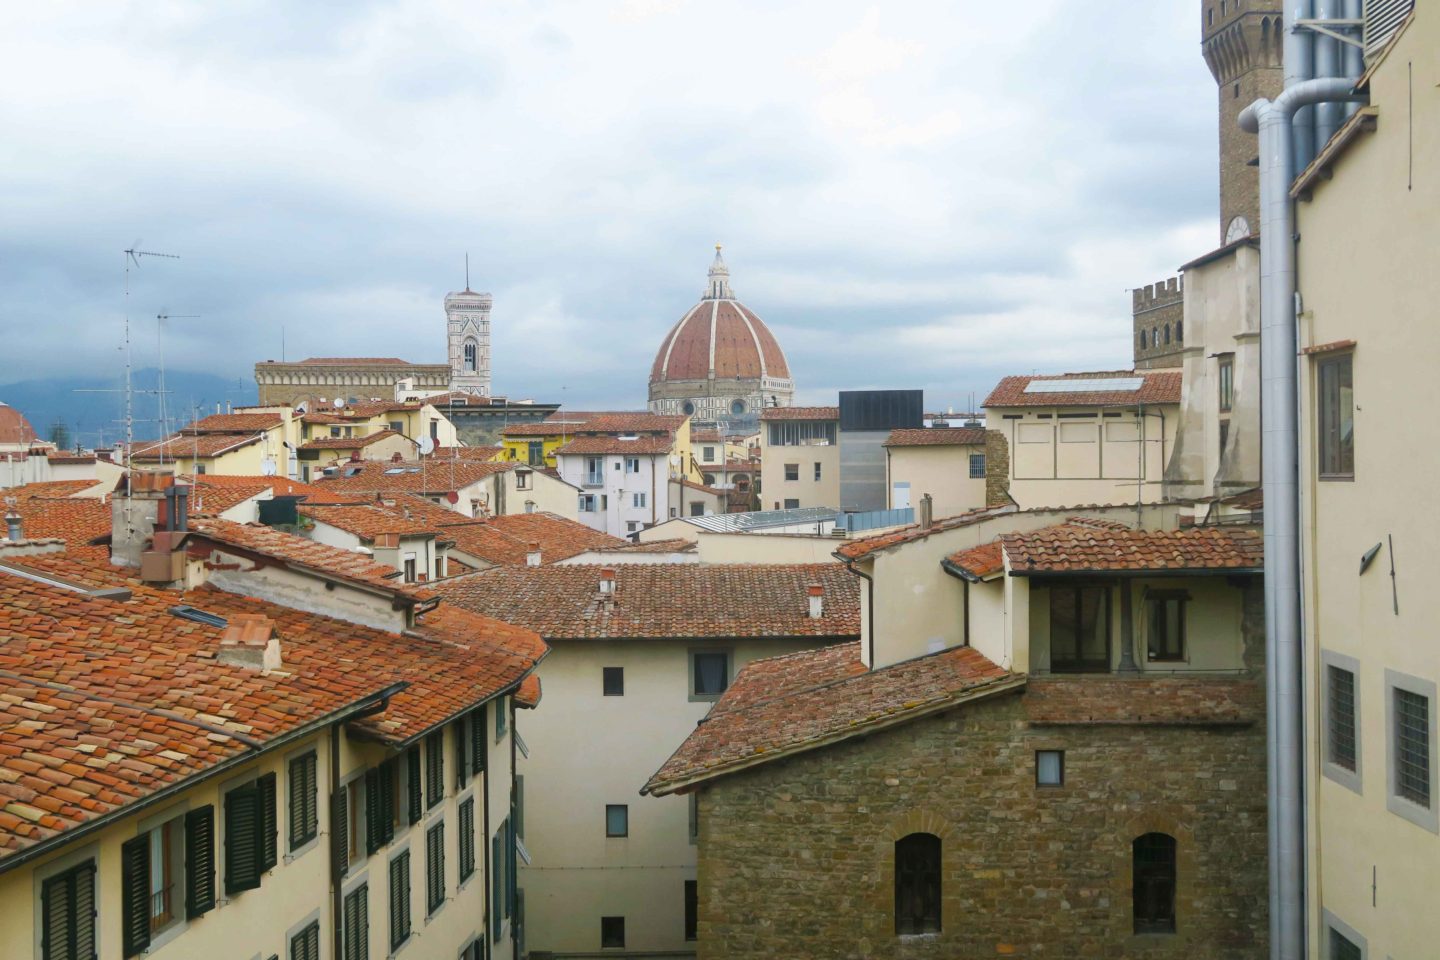 view from the uffizi gallery of the roof tops of florence